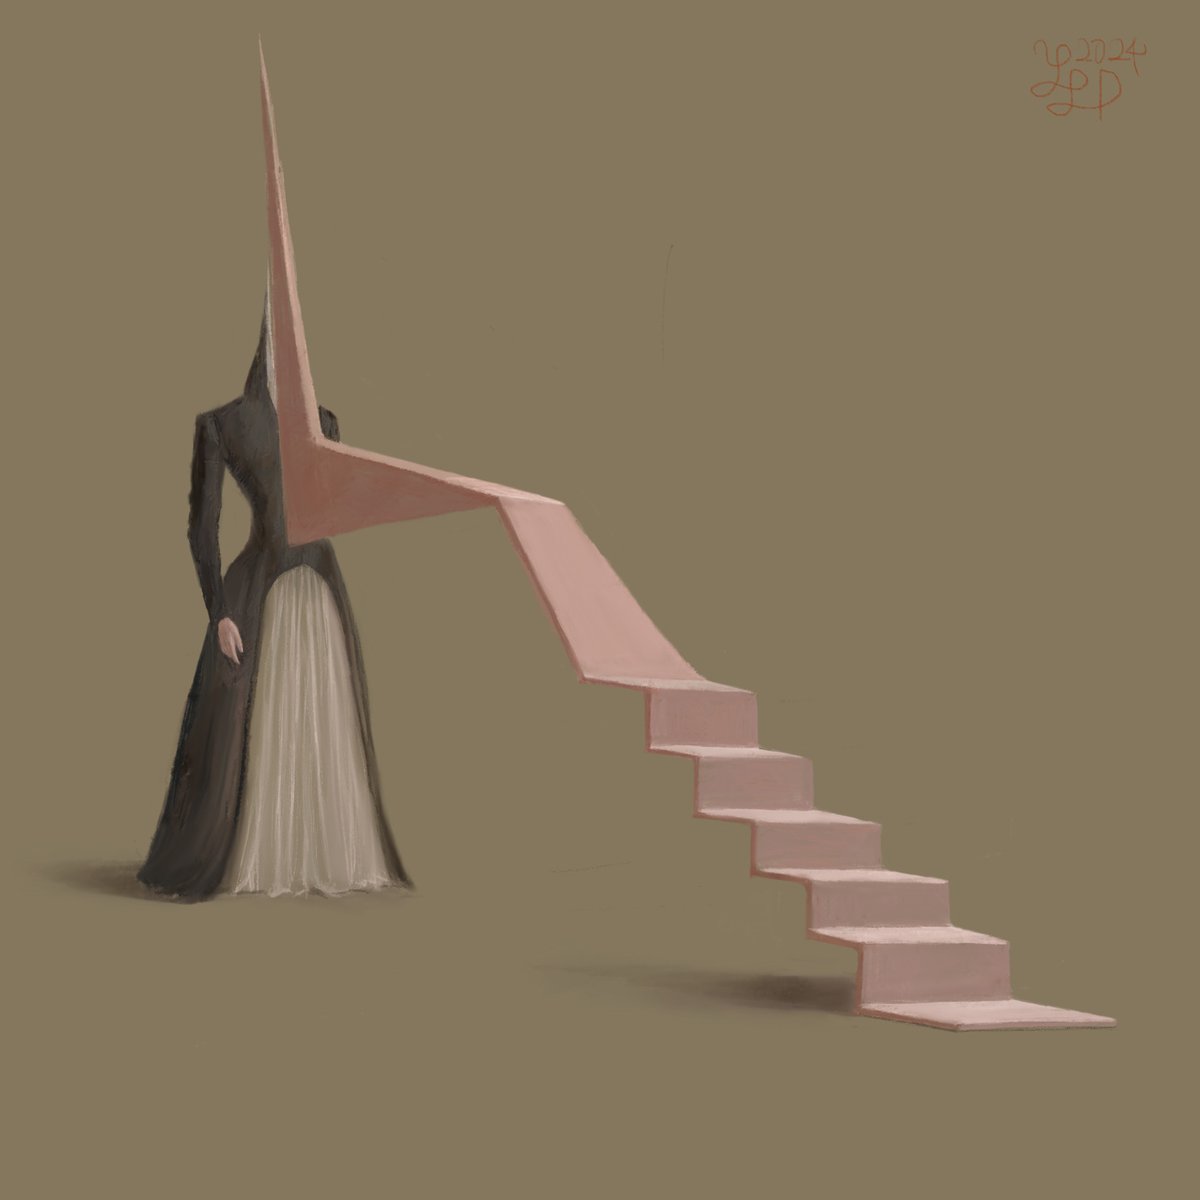 「Her stairs -彼女の階段-」

Image size:2000×2000px

デジタルドローイング作品をNFT化して「Adam」にて販売しています。

My Transformed human digital drawing artworks.

NFT Collection On Adam
Check them out
adam.jp/stores/yakeiban

#NFT #NFTart #NFTCollection #Adam #アート